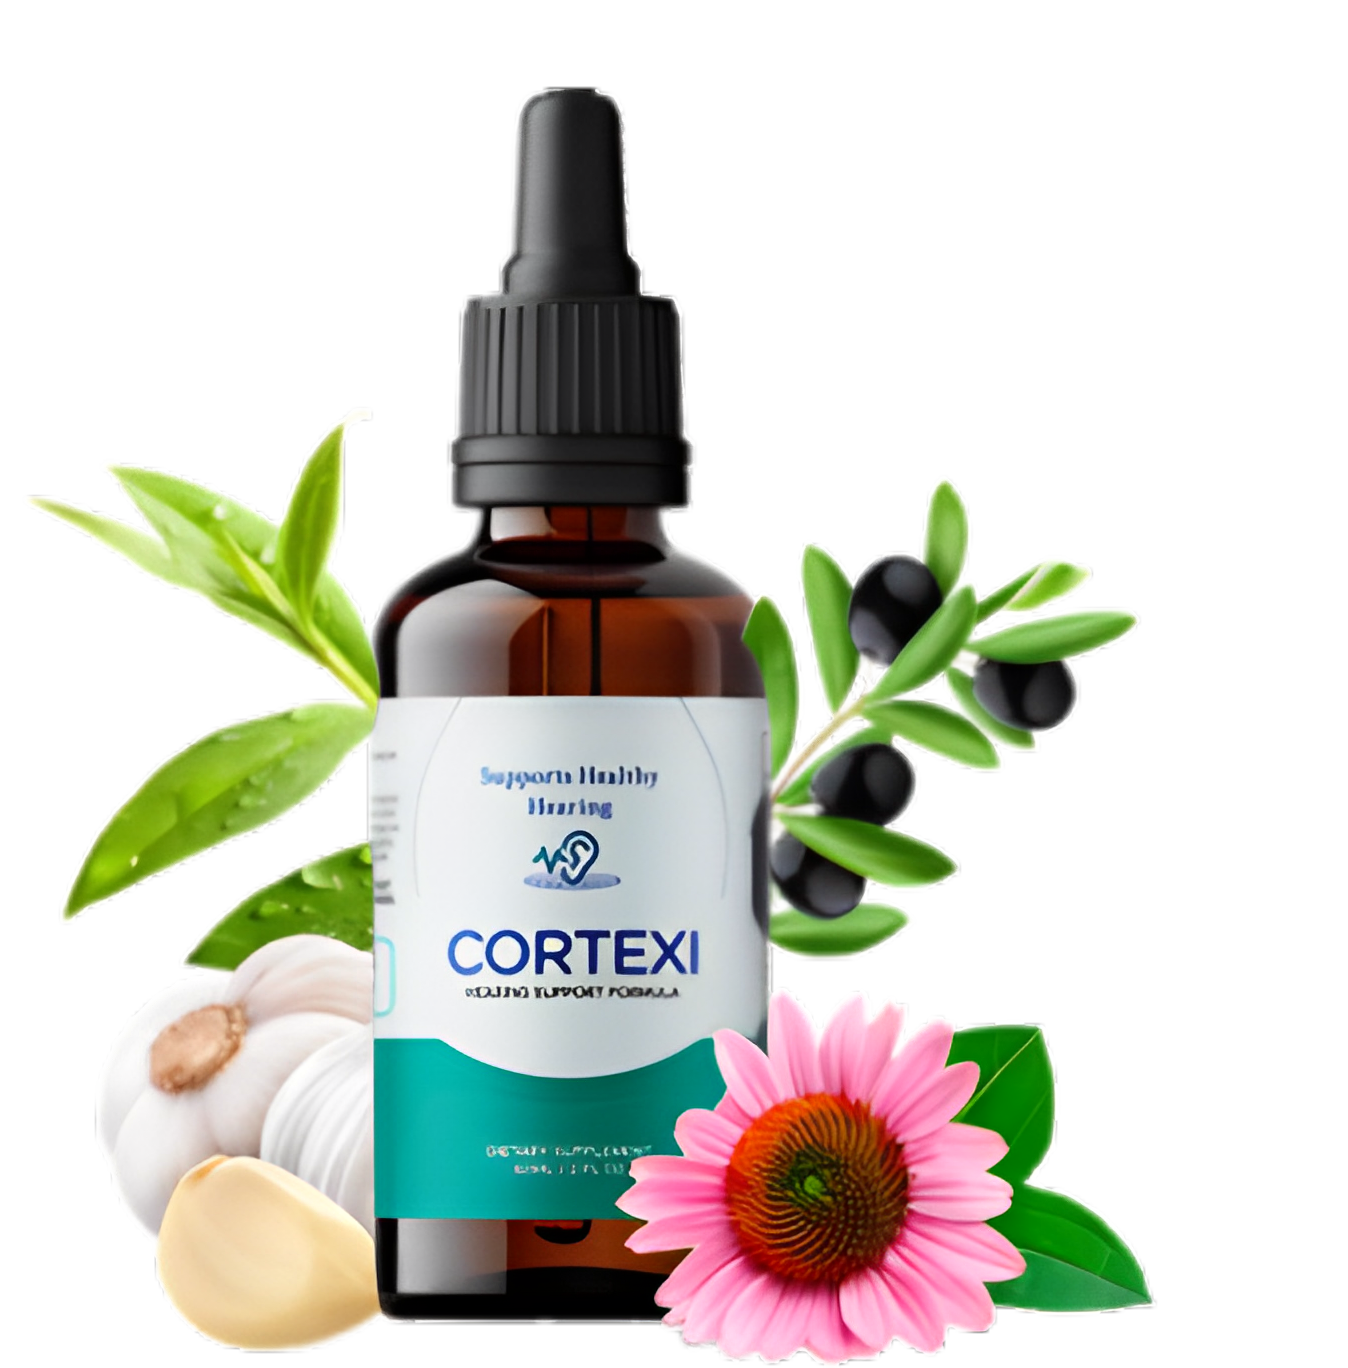 Restore your hearing health with Cortexi